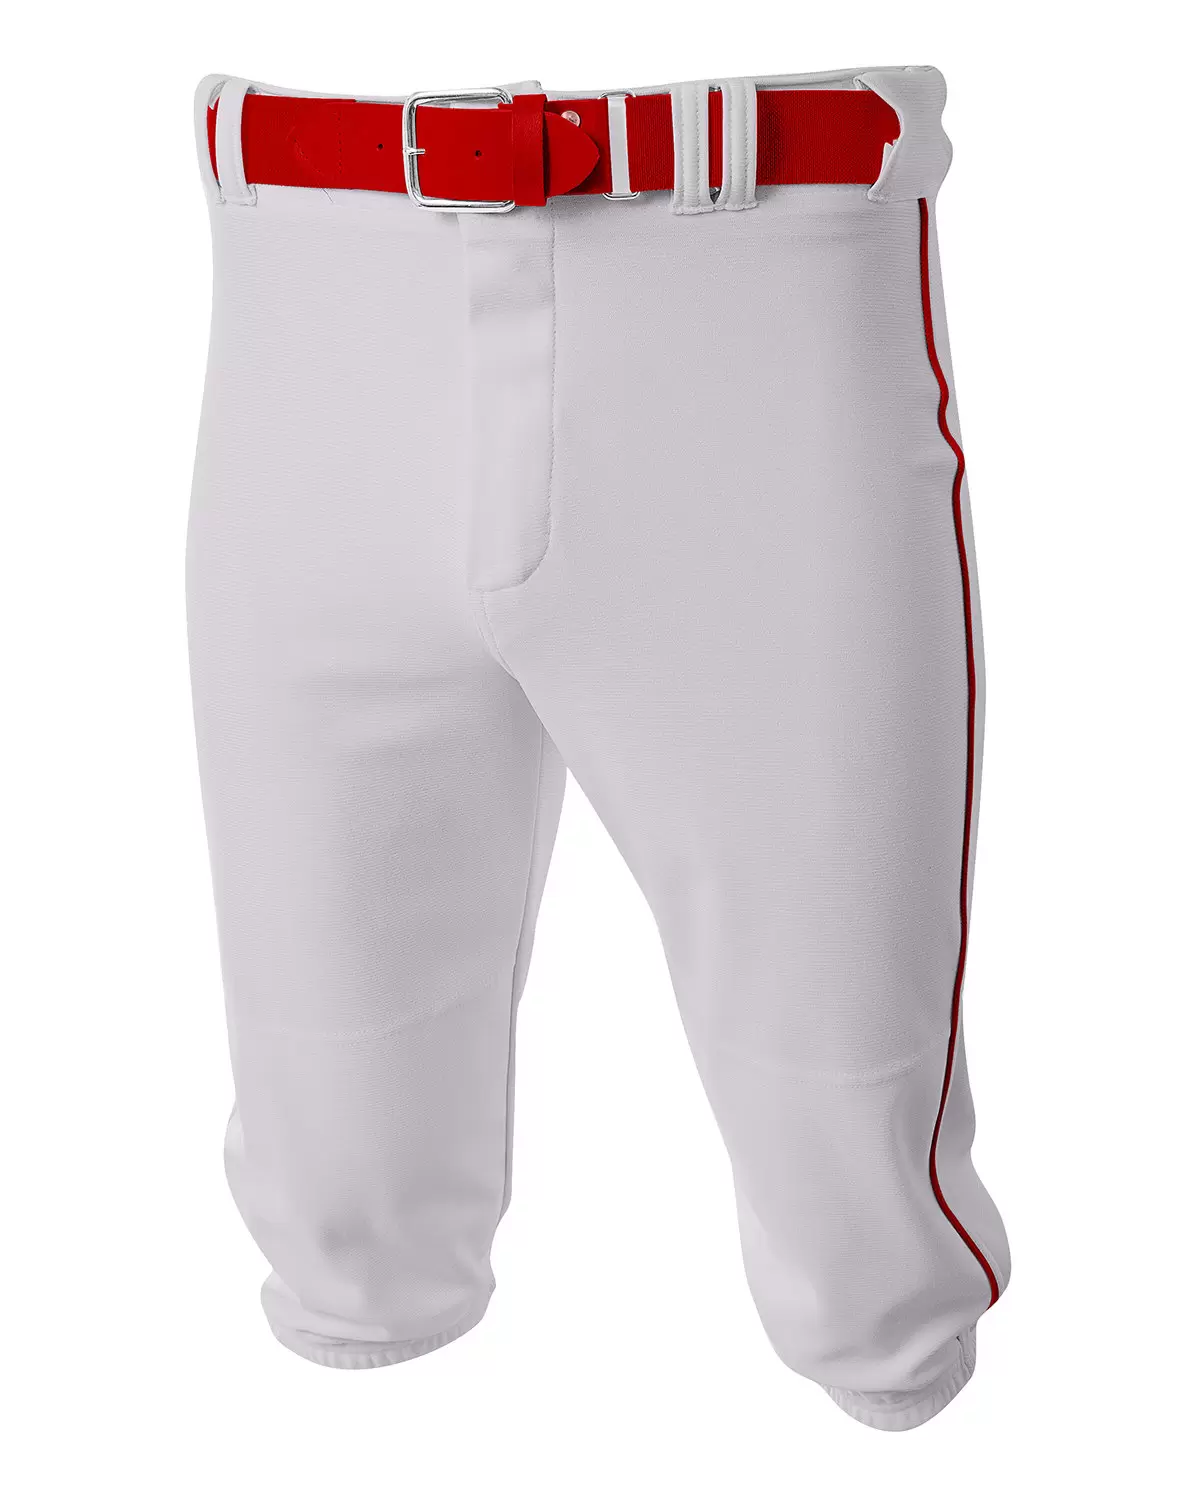 A4 N6003 Baseball Knicker Pant - Grey Forest